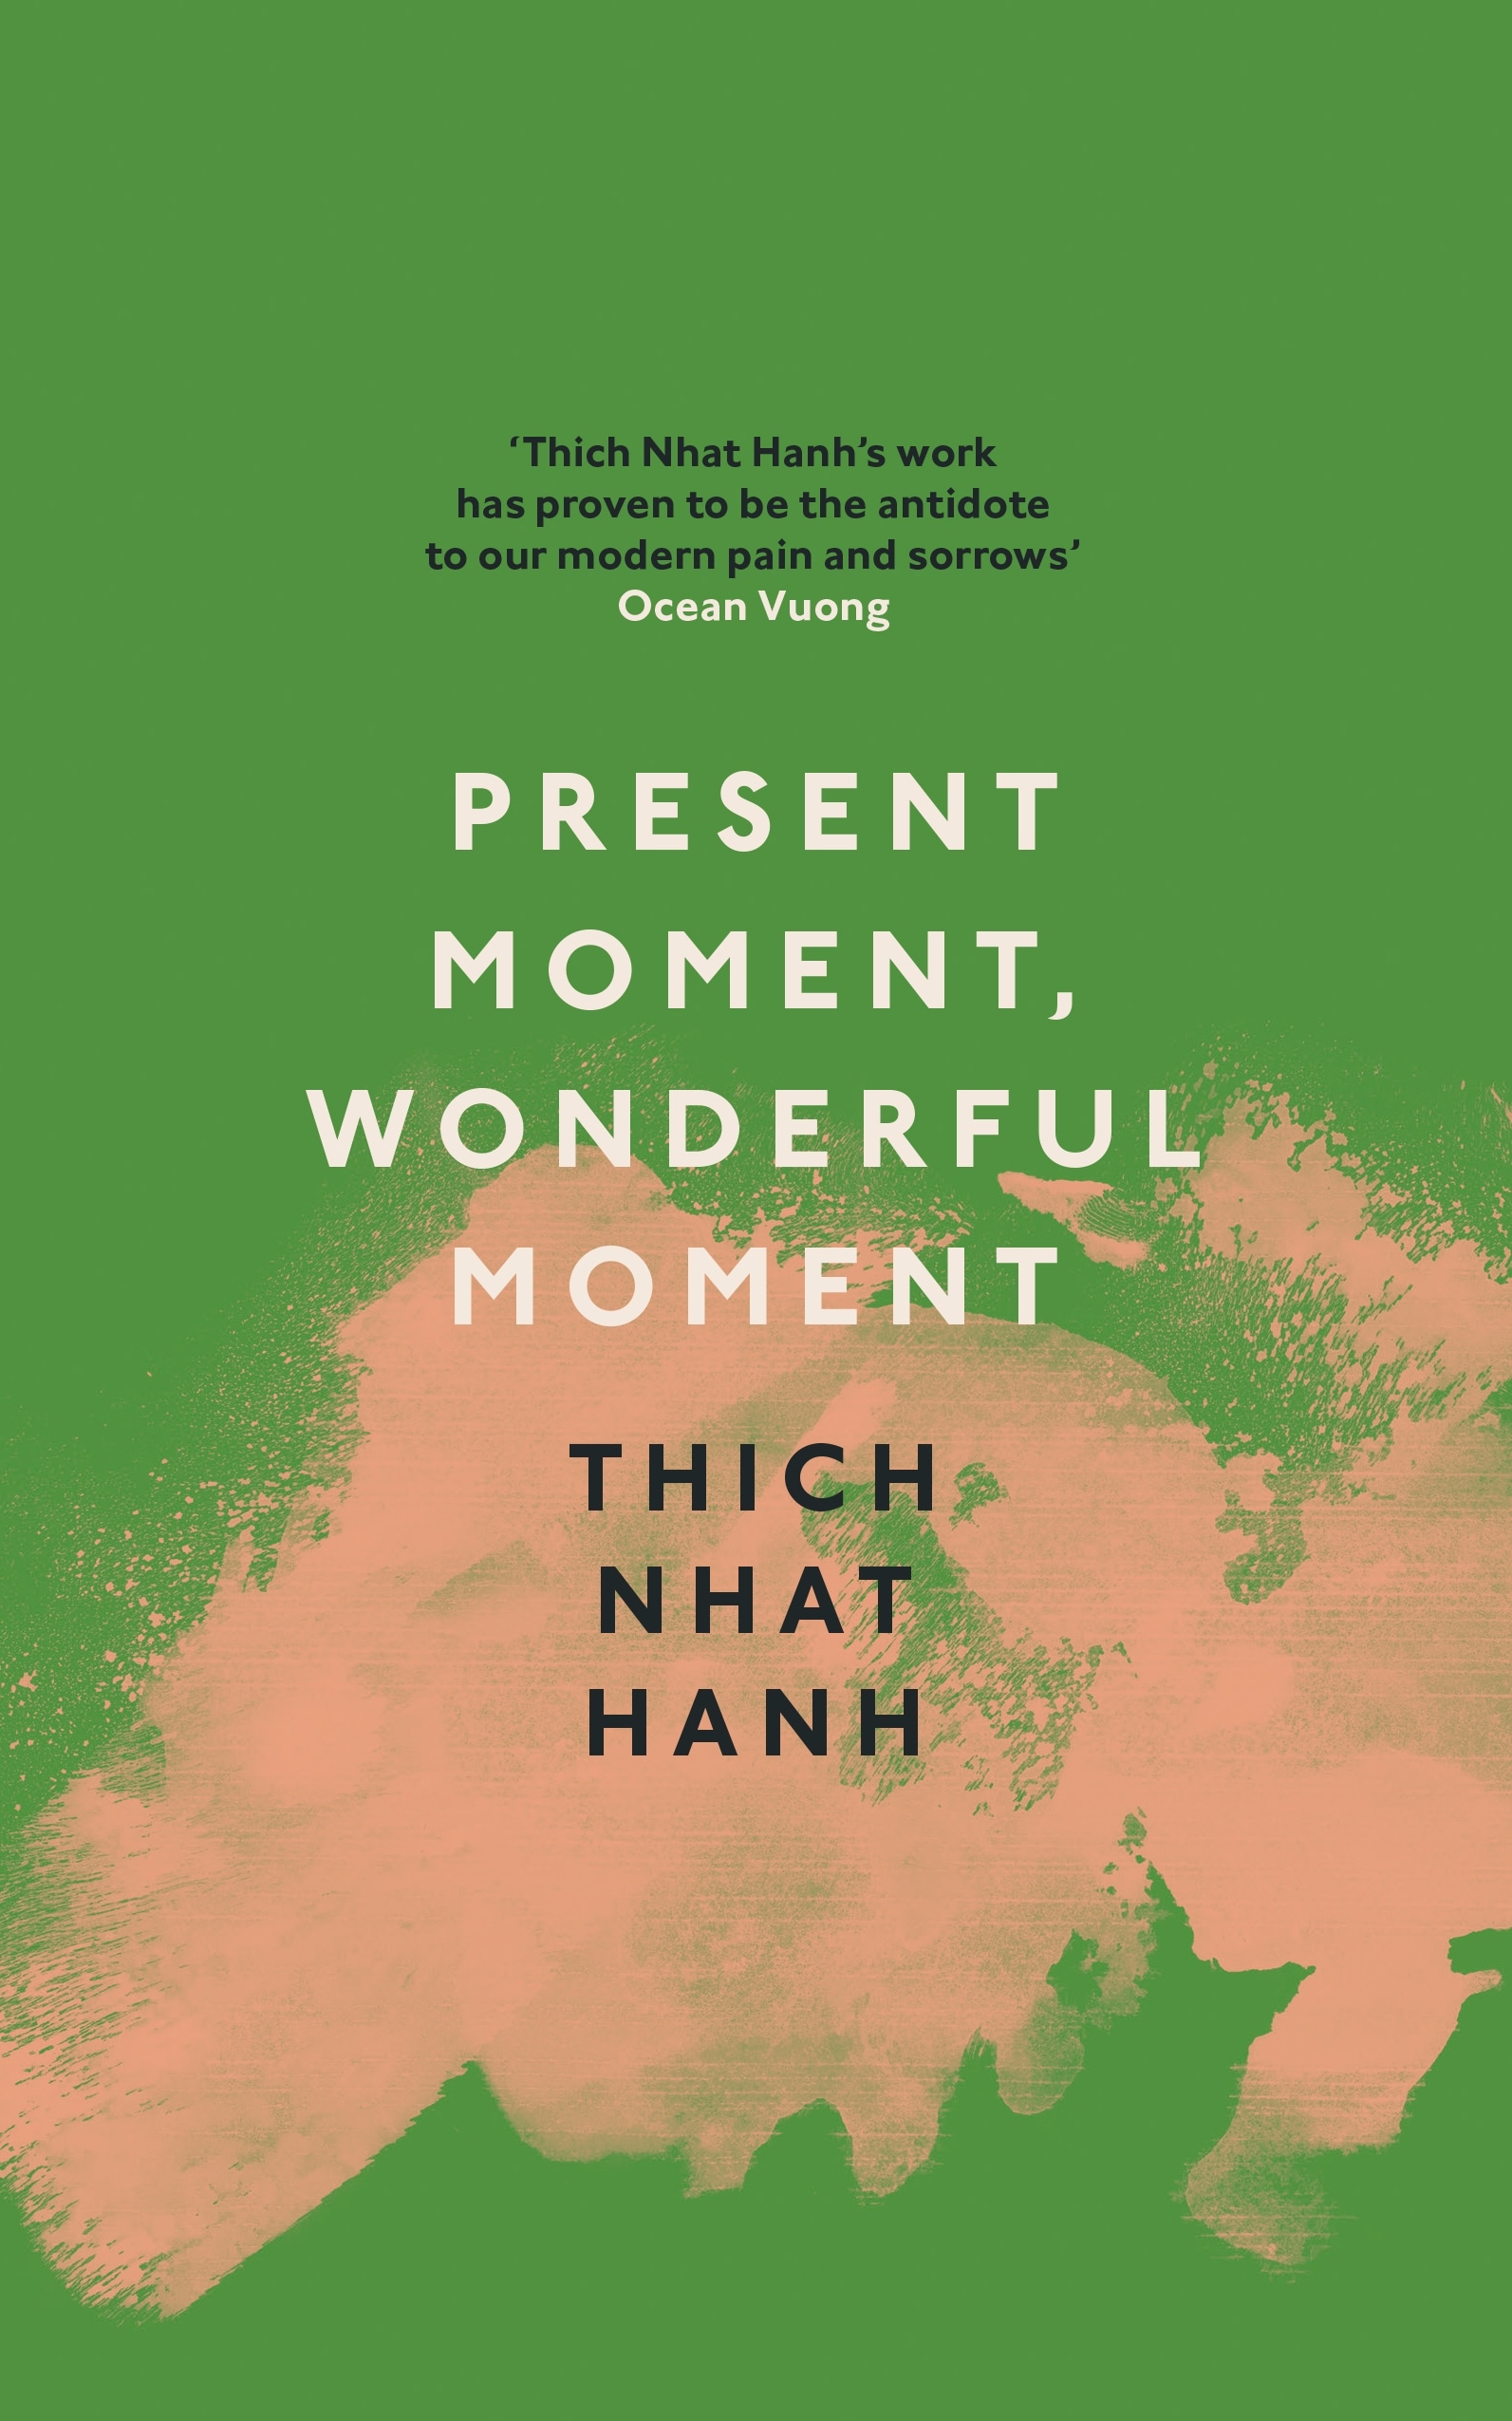 Book “Present Moment, Wonderful Moment” by Thich Nhat Hanh — August 26, 2021